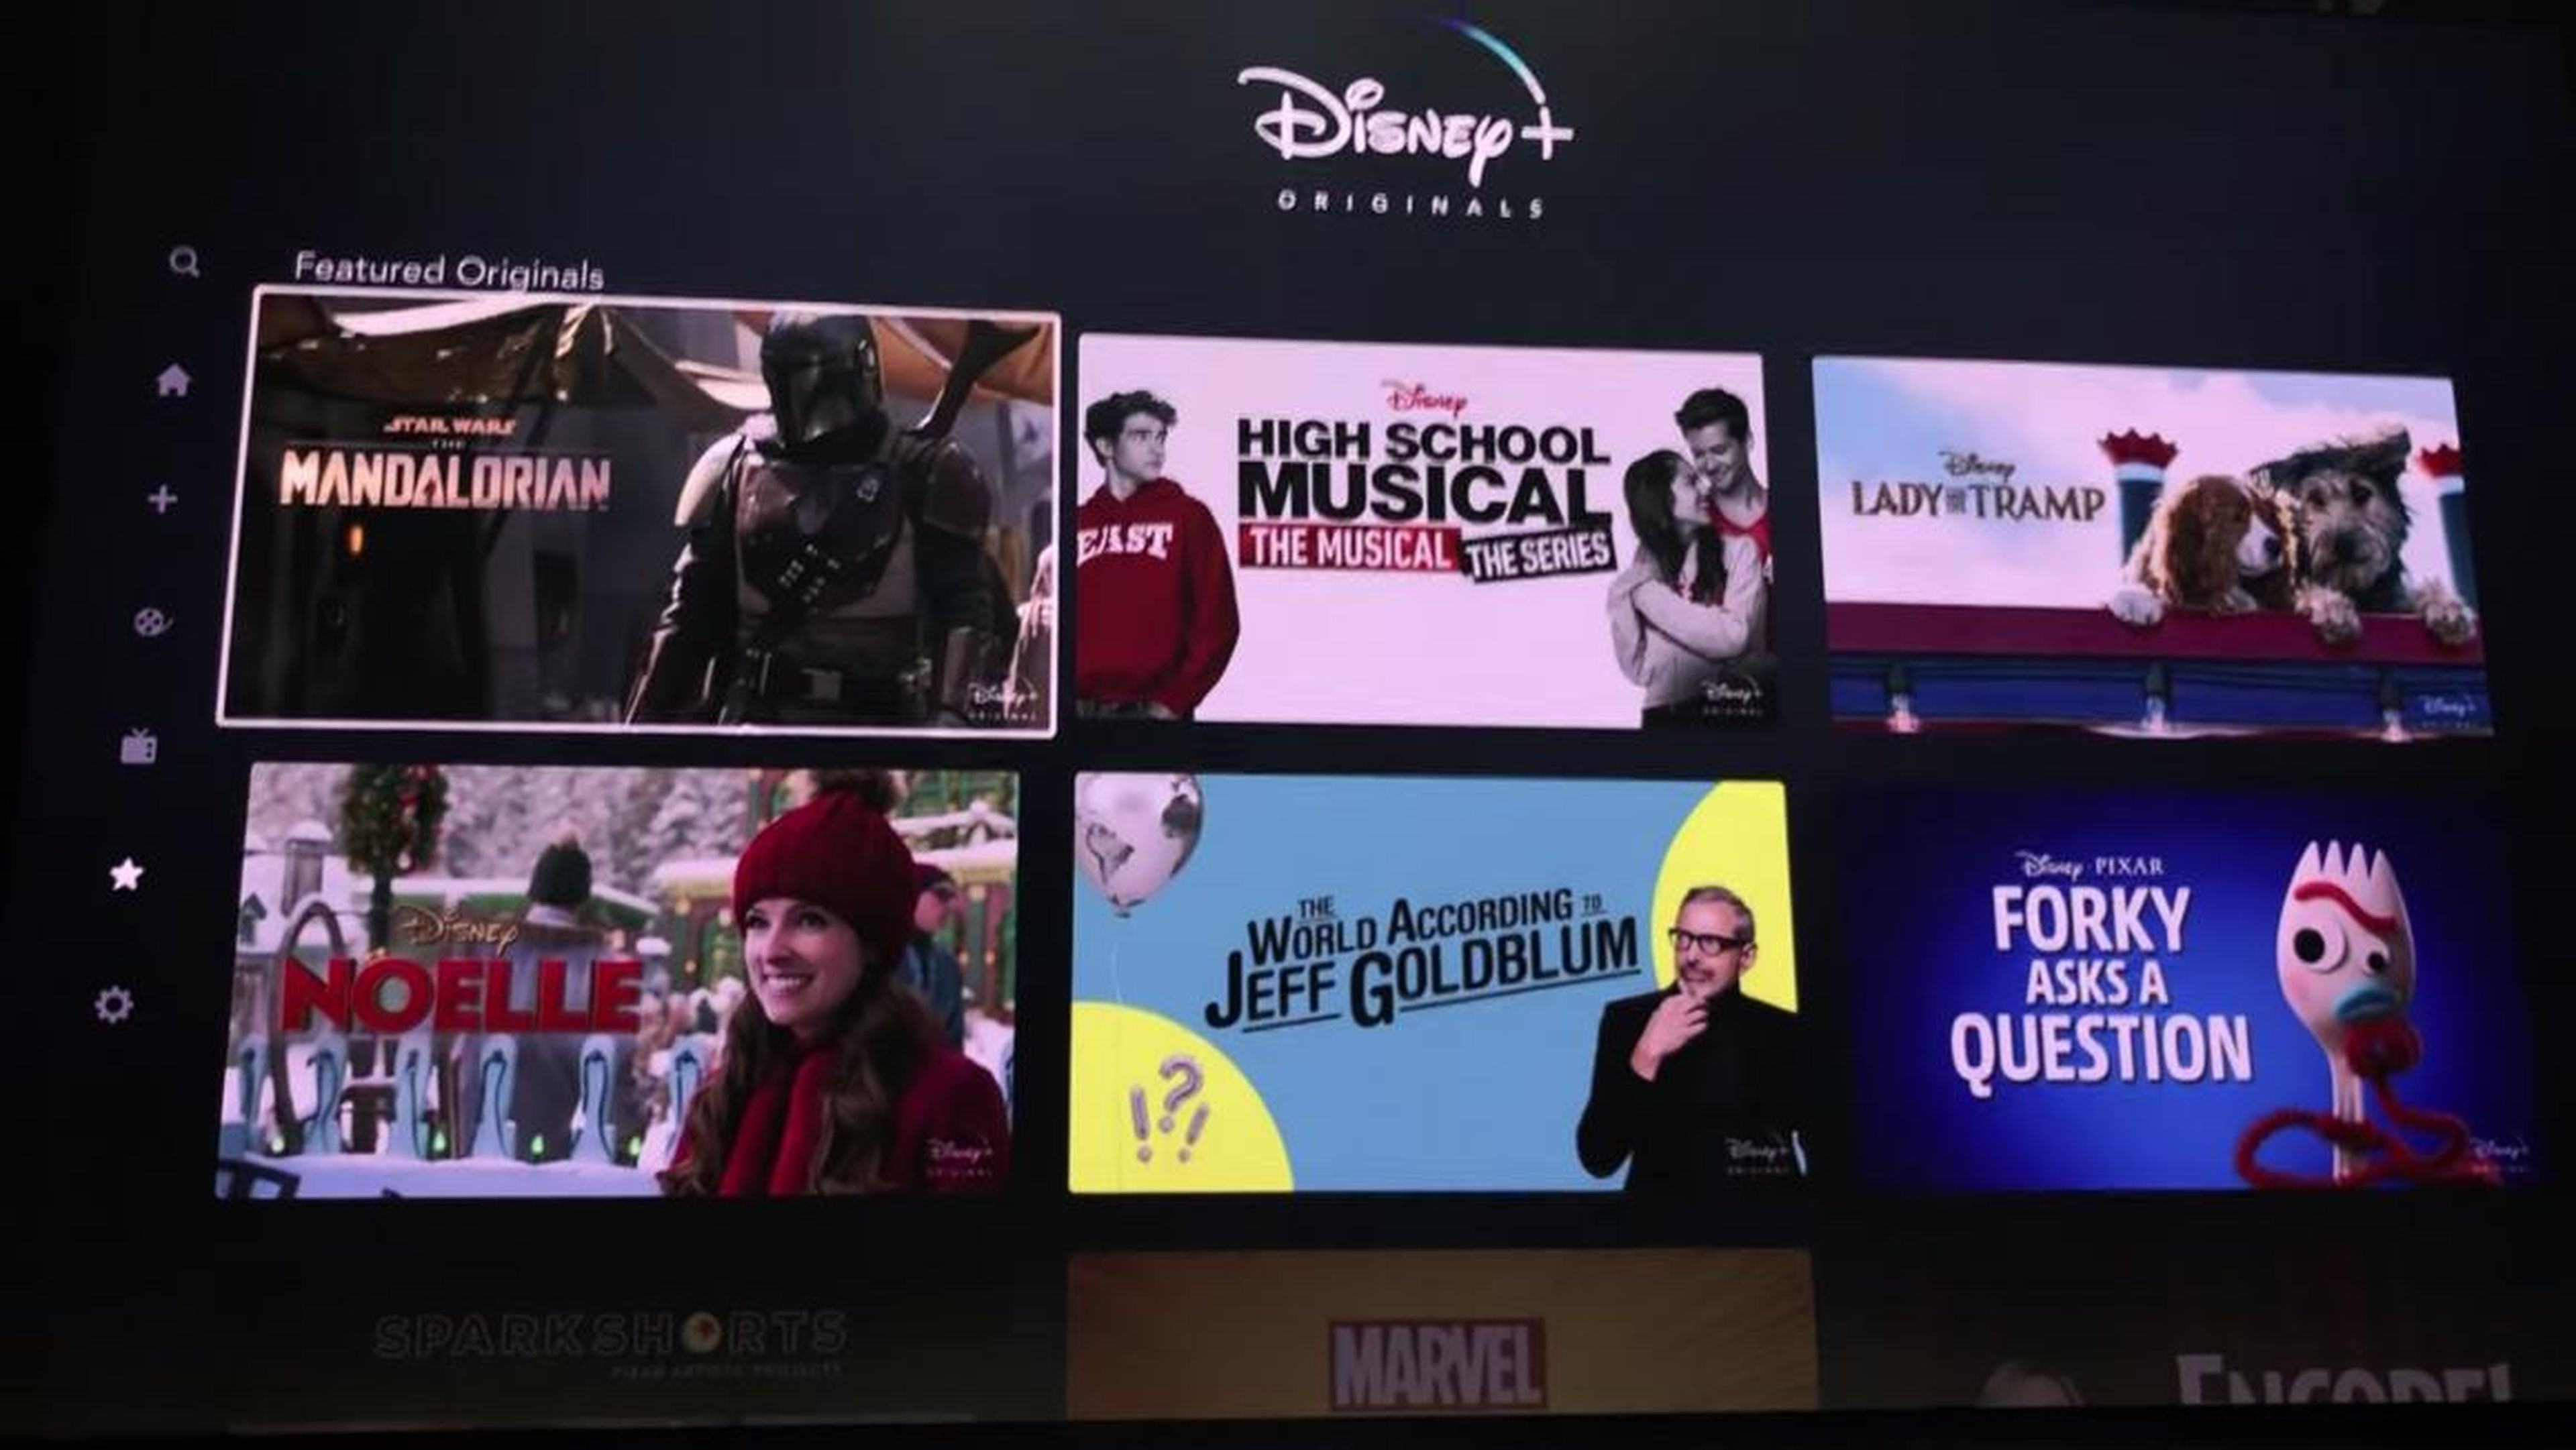 It doesn't look as if you'll get any filters when you visit the Disney Plus Originals tab, however, which just shows you a big grid of content to choose from.